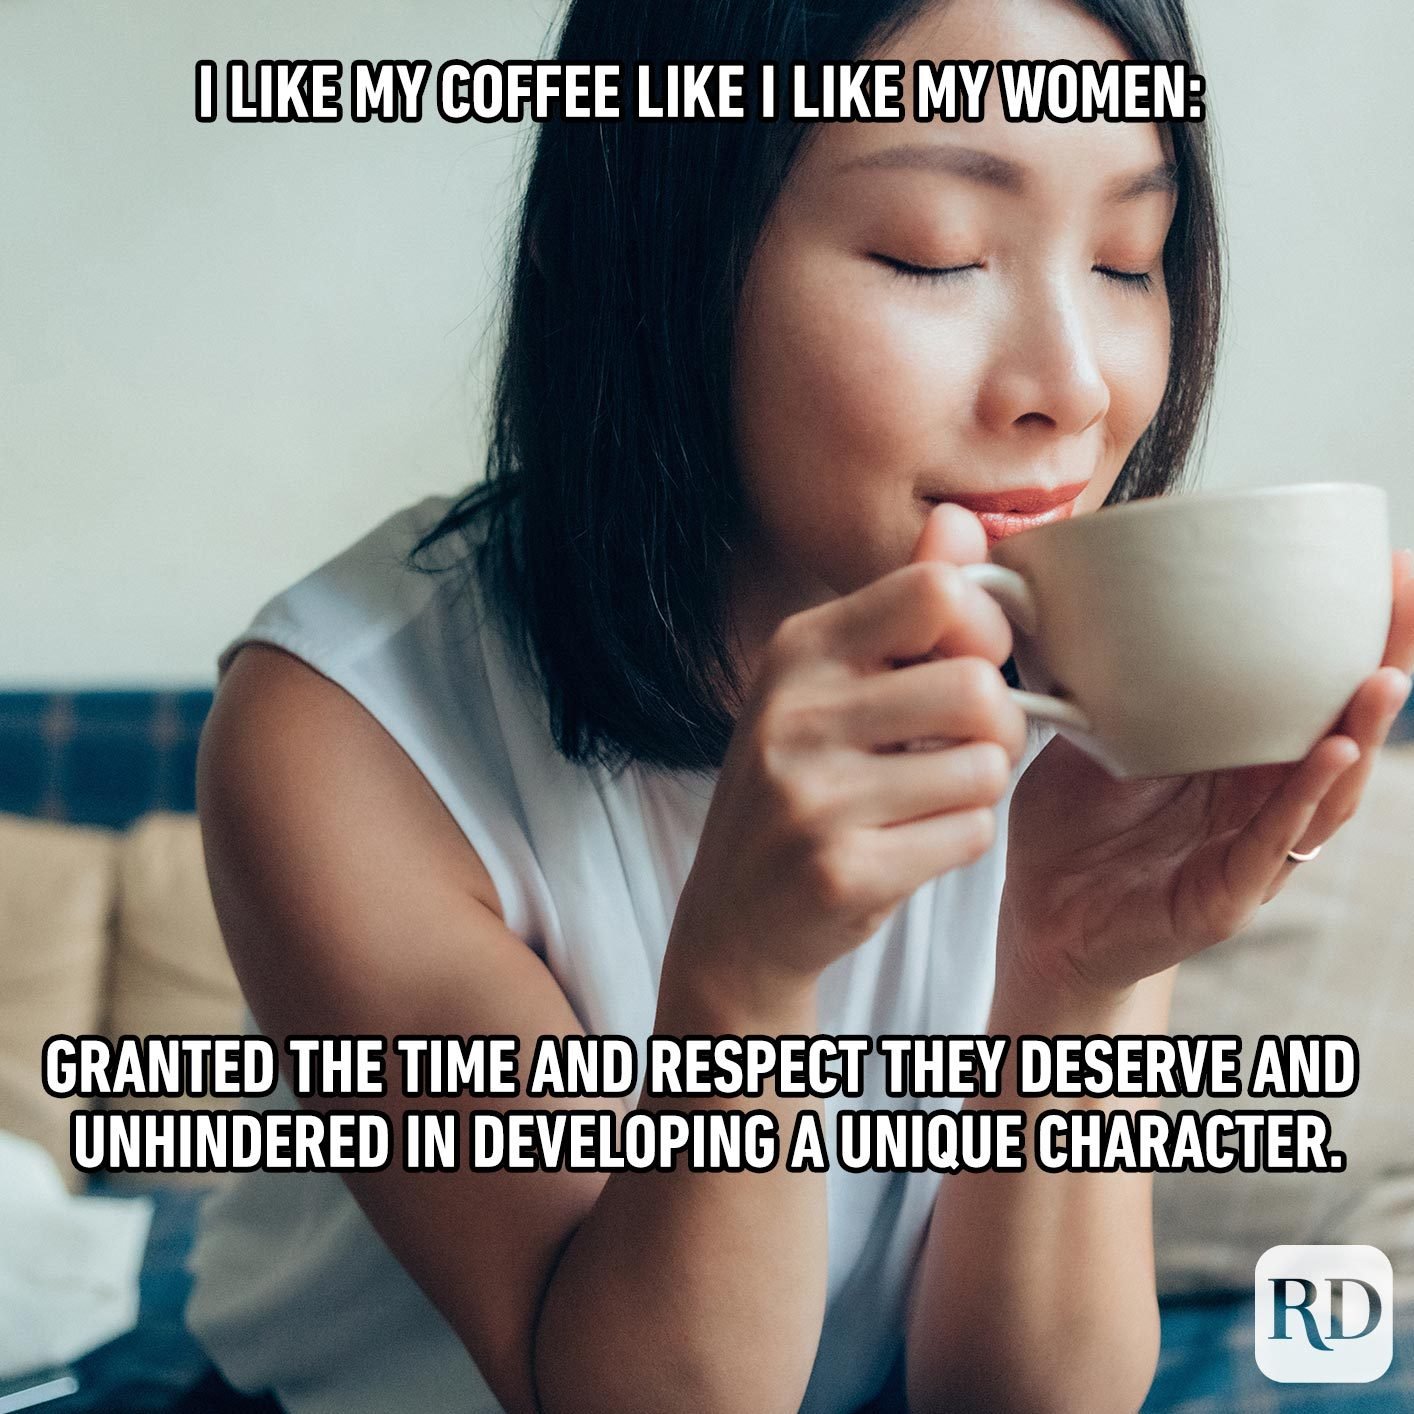 woman sipping coffee. Meme text: I like my coffee like I like my women: Granted the time and respect they deserve and unhindered in developing a unique character.